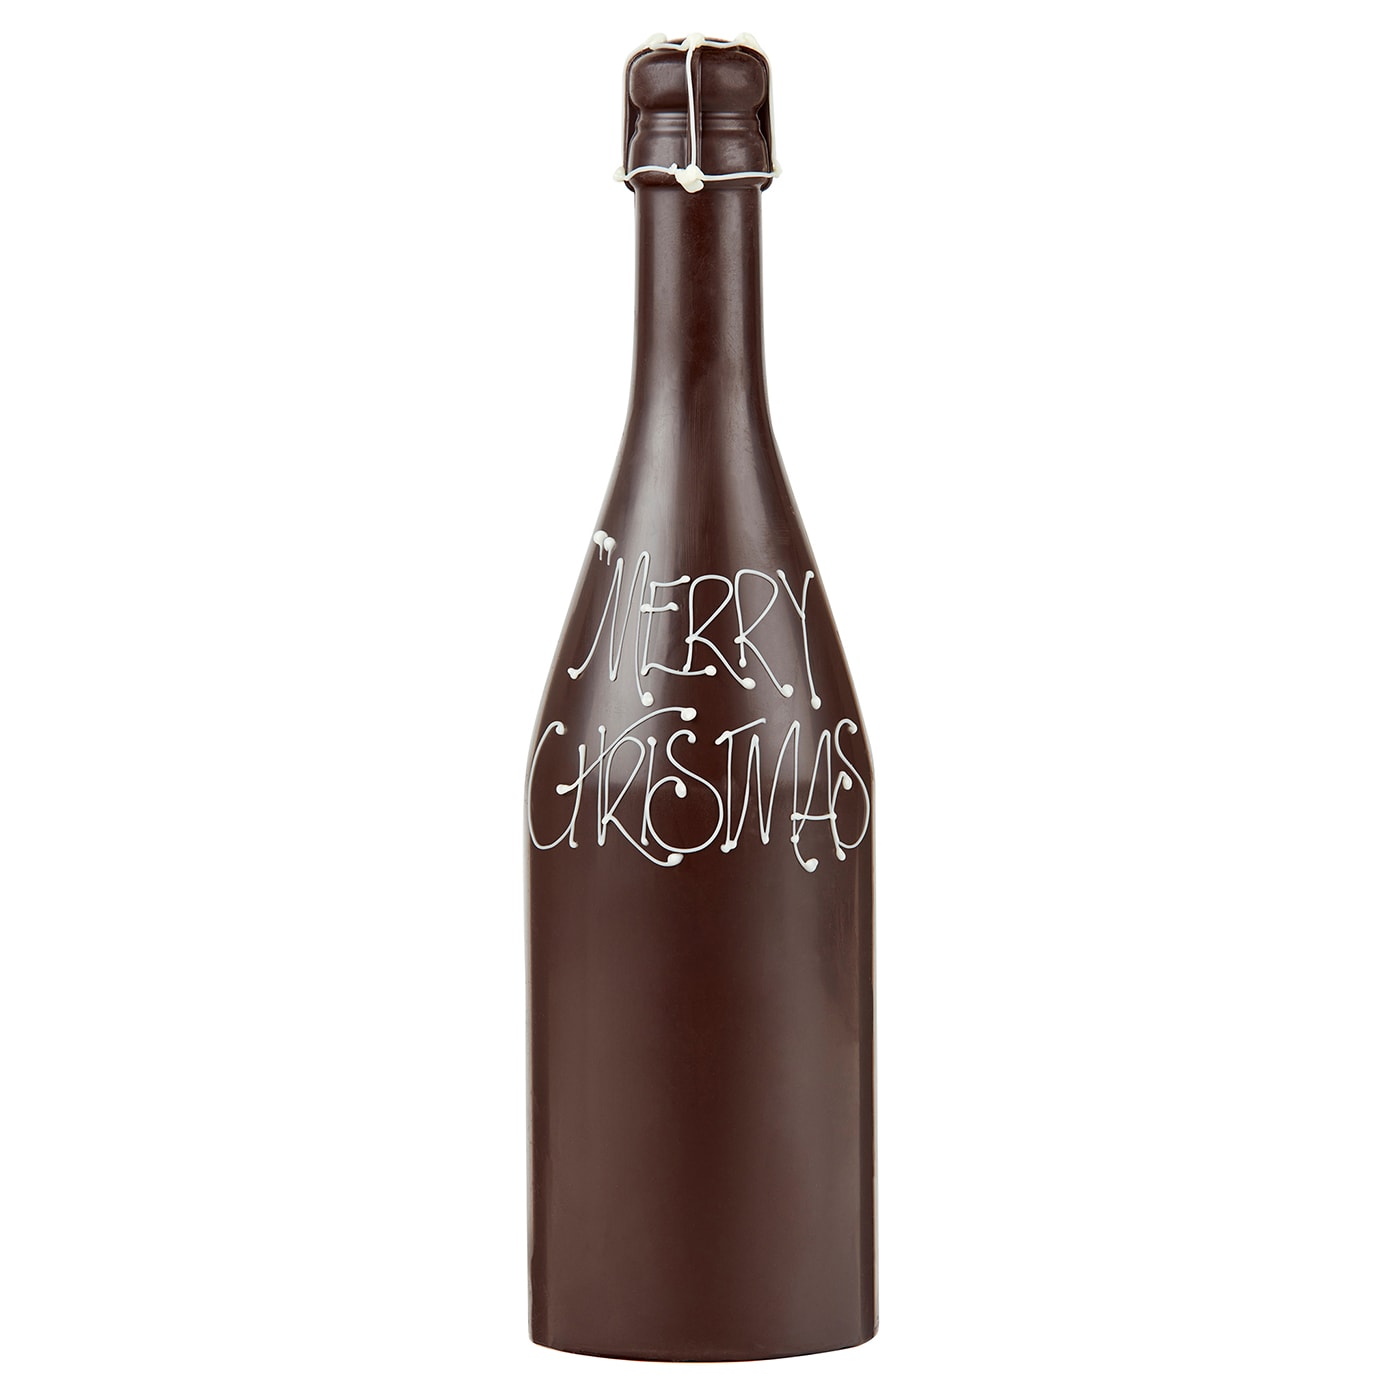 Chocilo Melbourne Large Christmas Dark Chocolate Champagne Bottle Gift. Hand made in Melbourne.